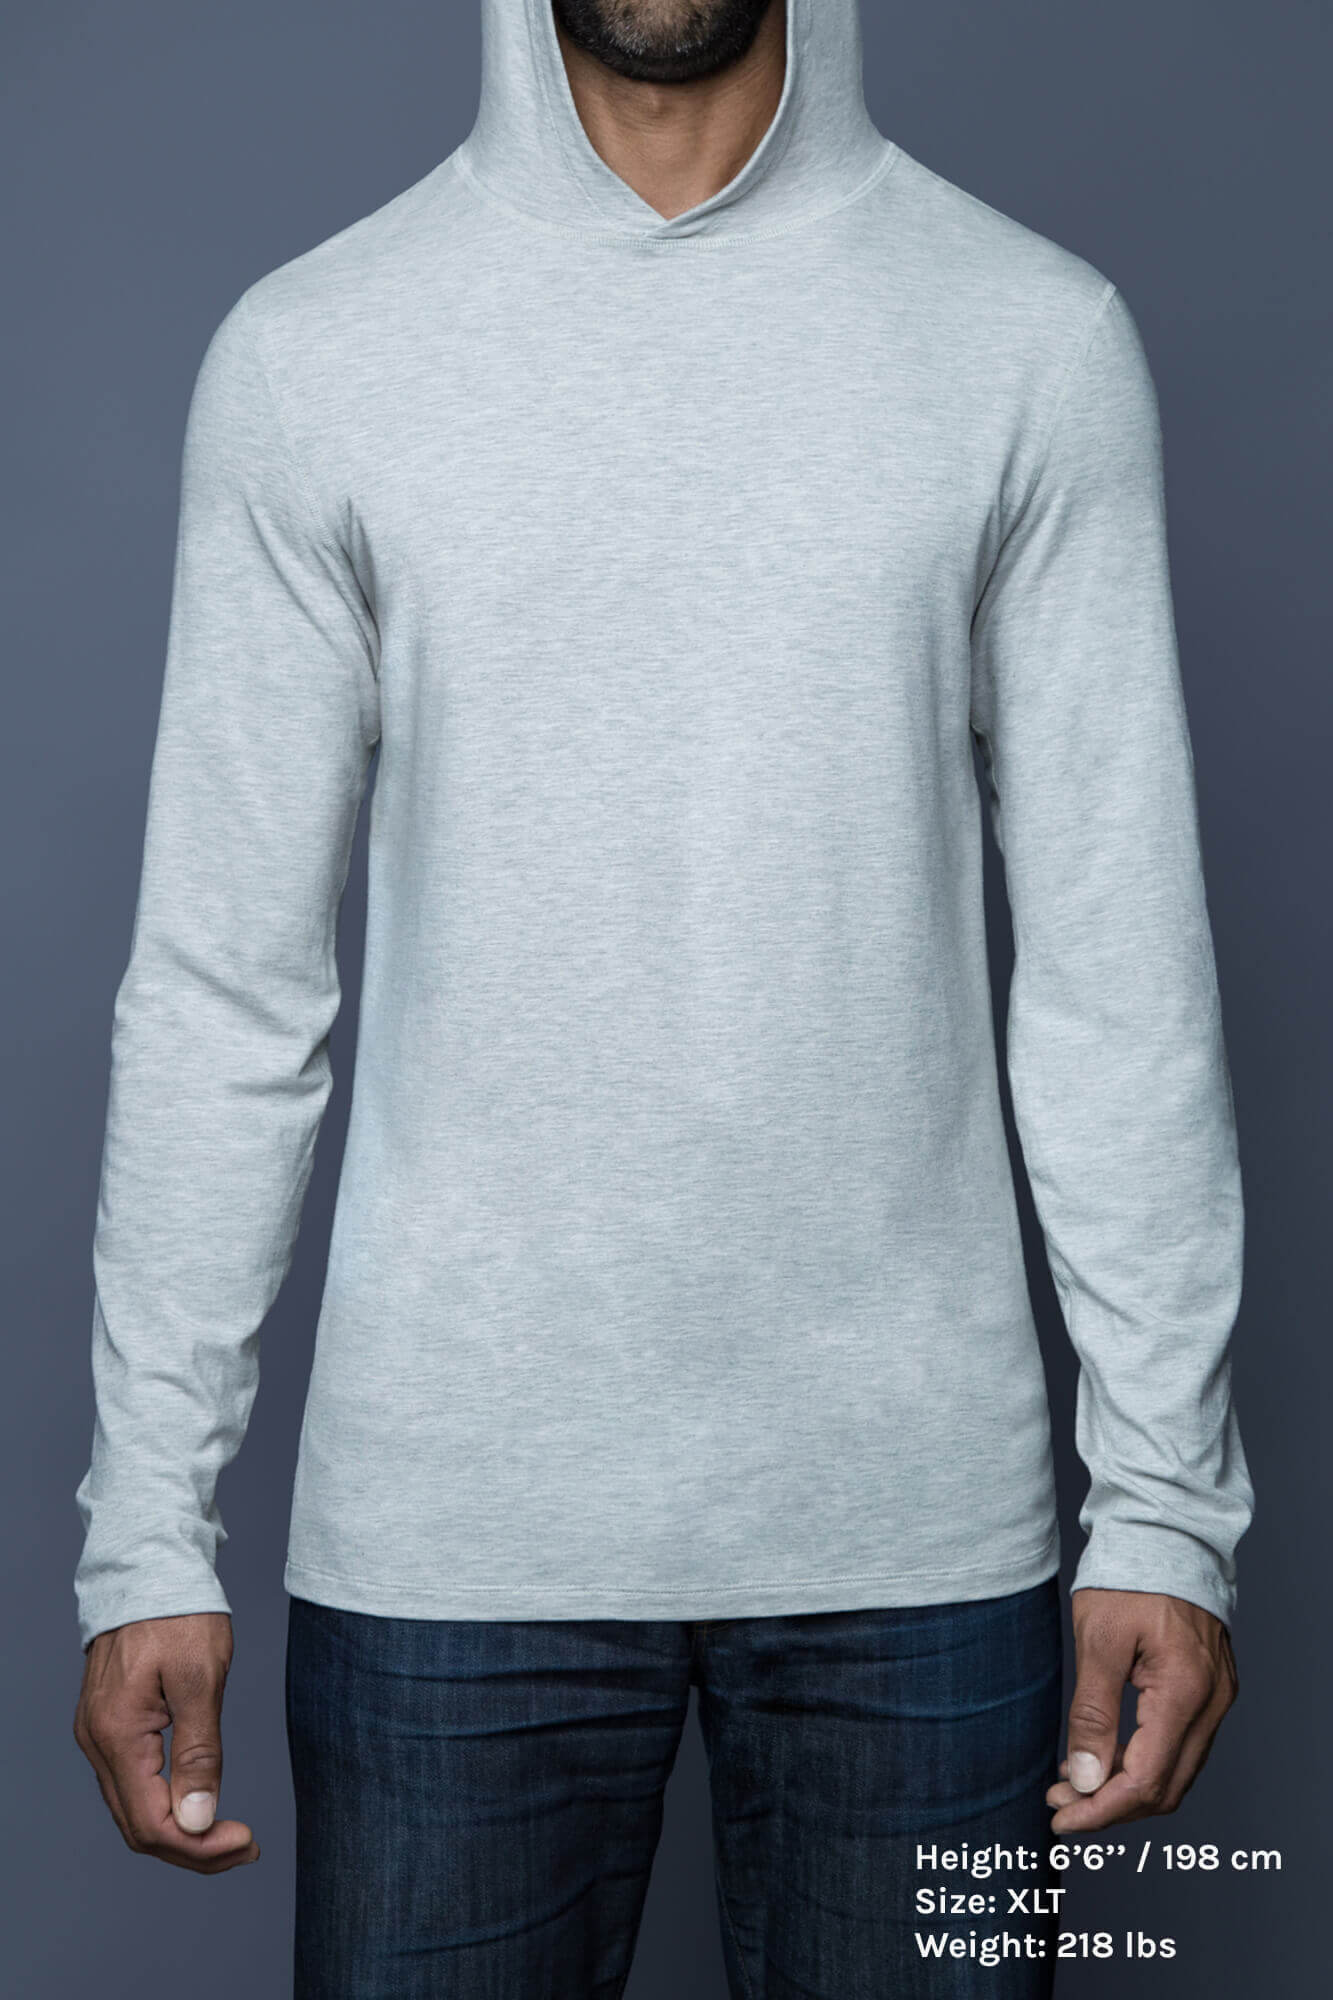 The Navas Lab Vasquez Microstripe long-sleeve hooded shirt for tall guys in light mix. The perfect tall slim shirt for tall and slim guys looking for style and comfort.